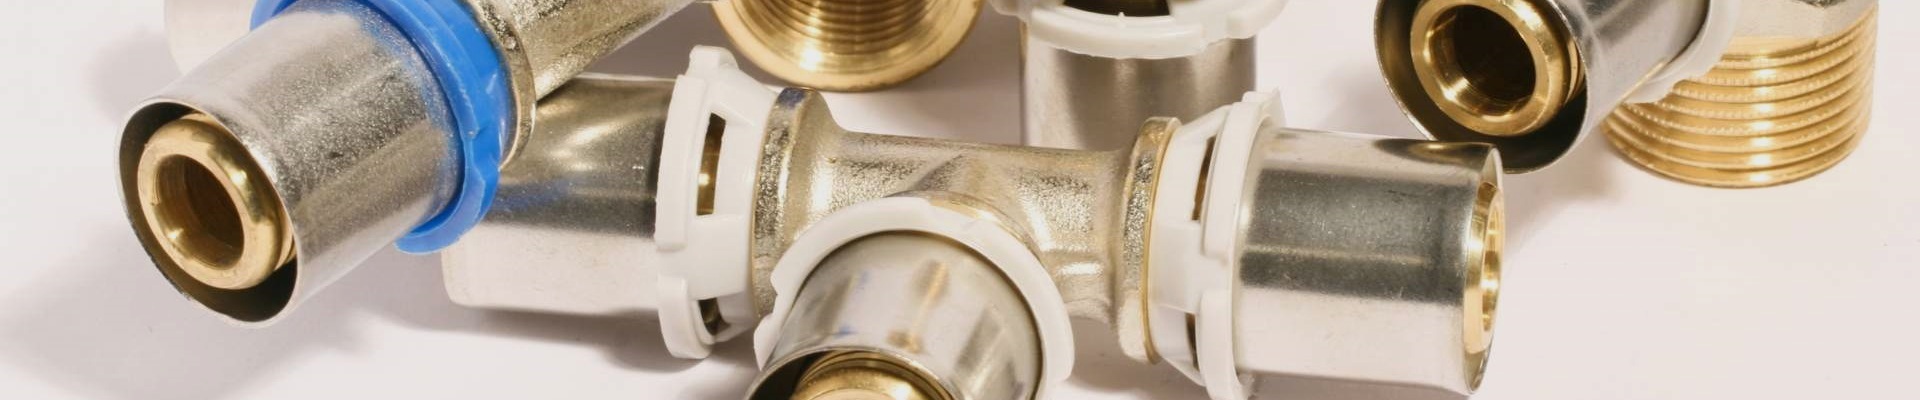 Request Service Plumbers Much Hadham, Perry Green, SG10